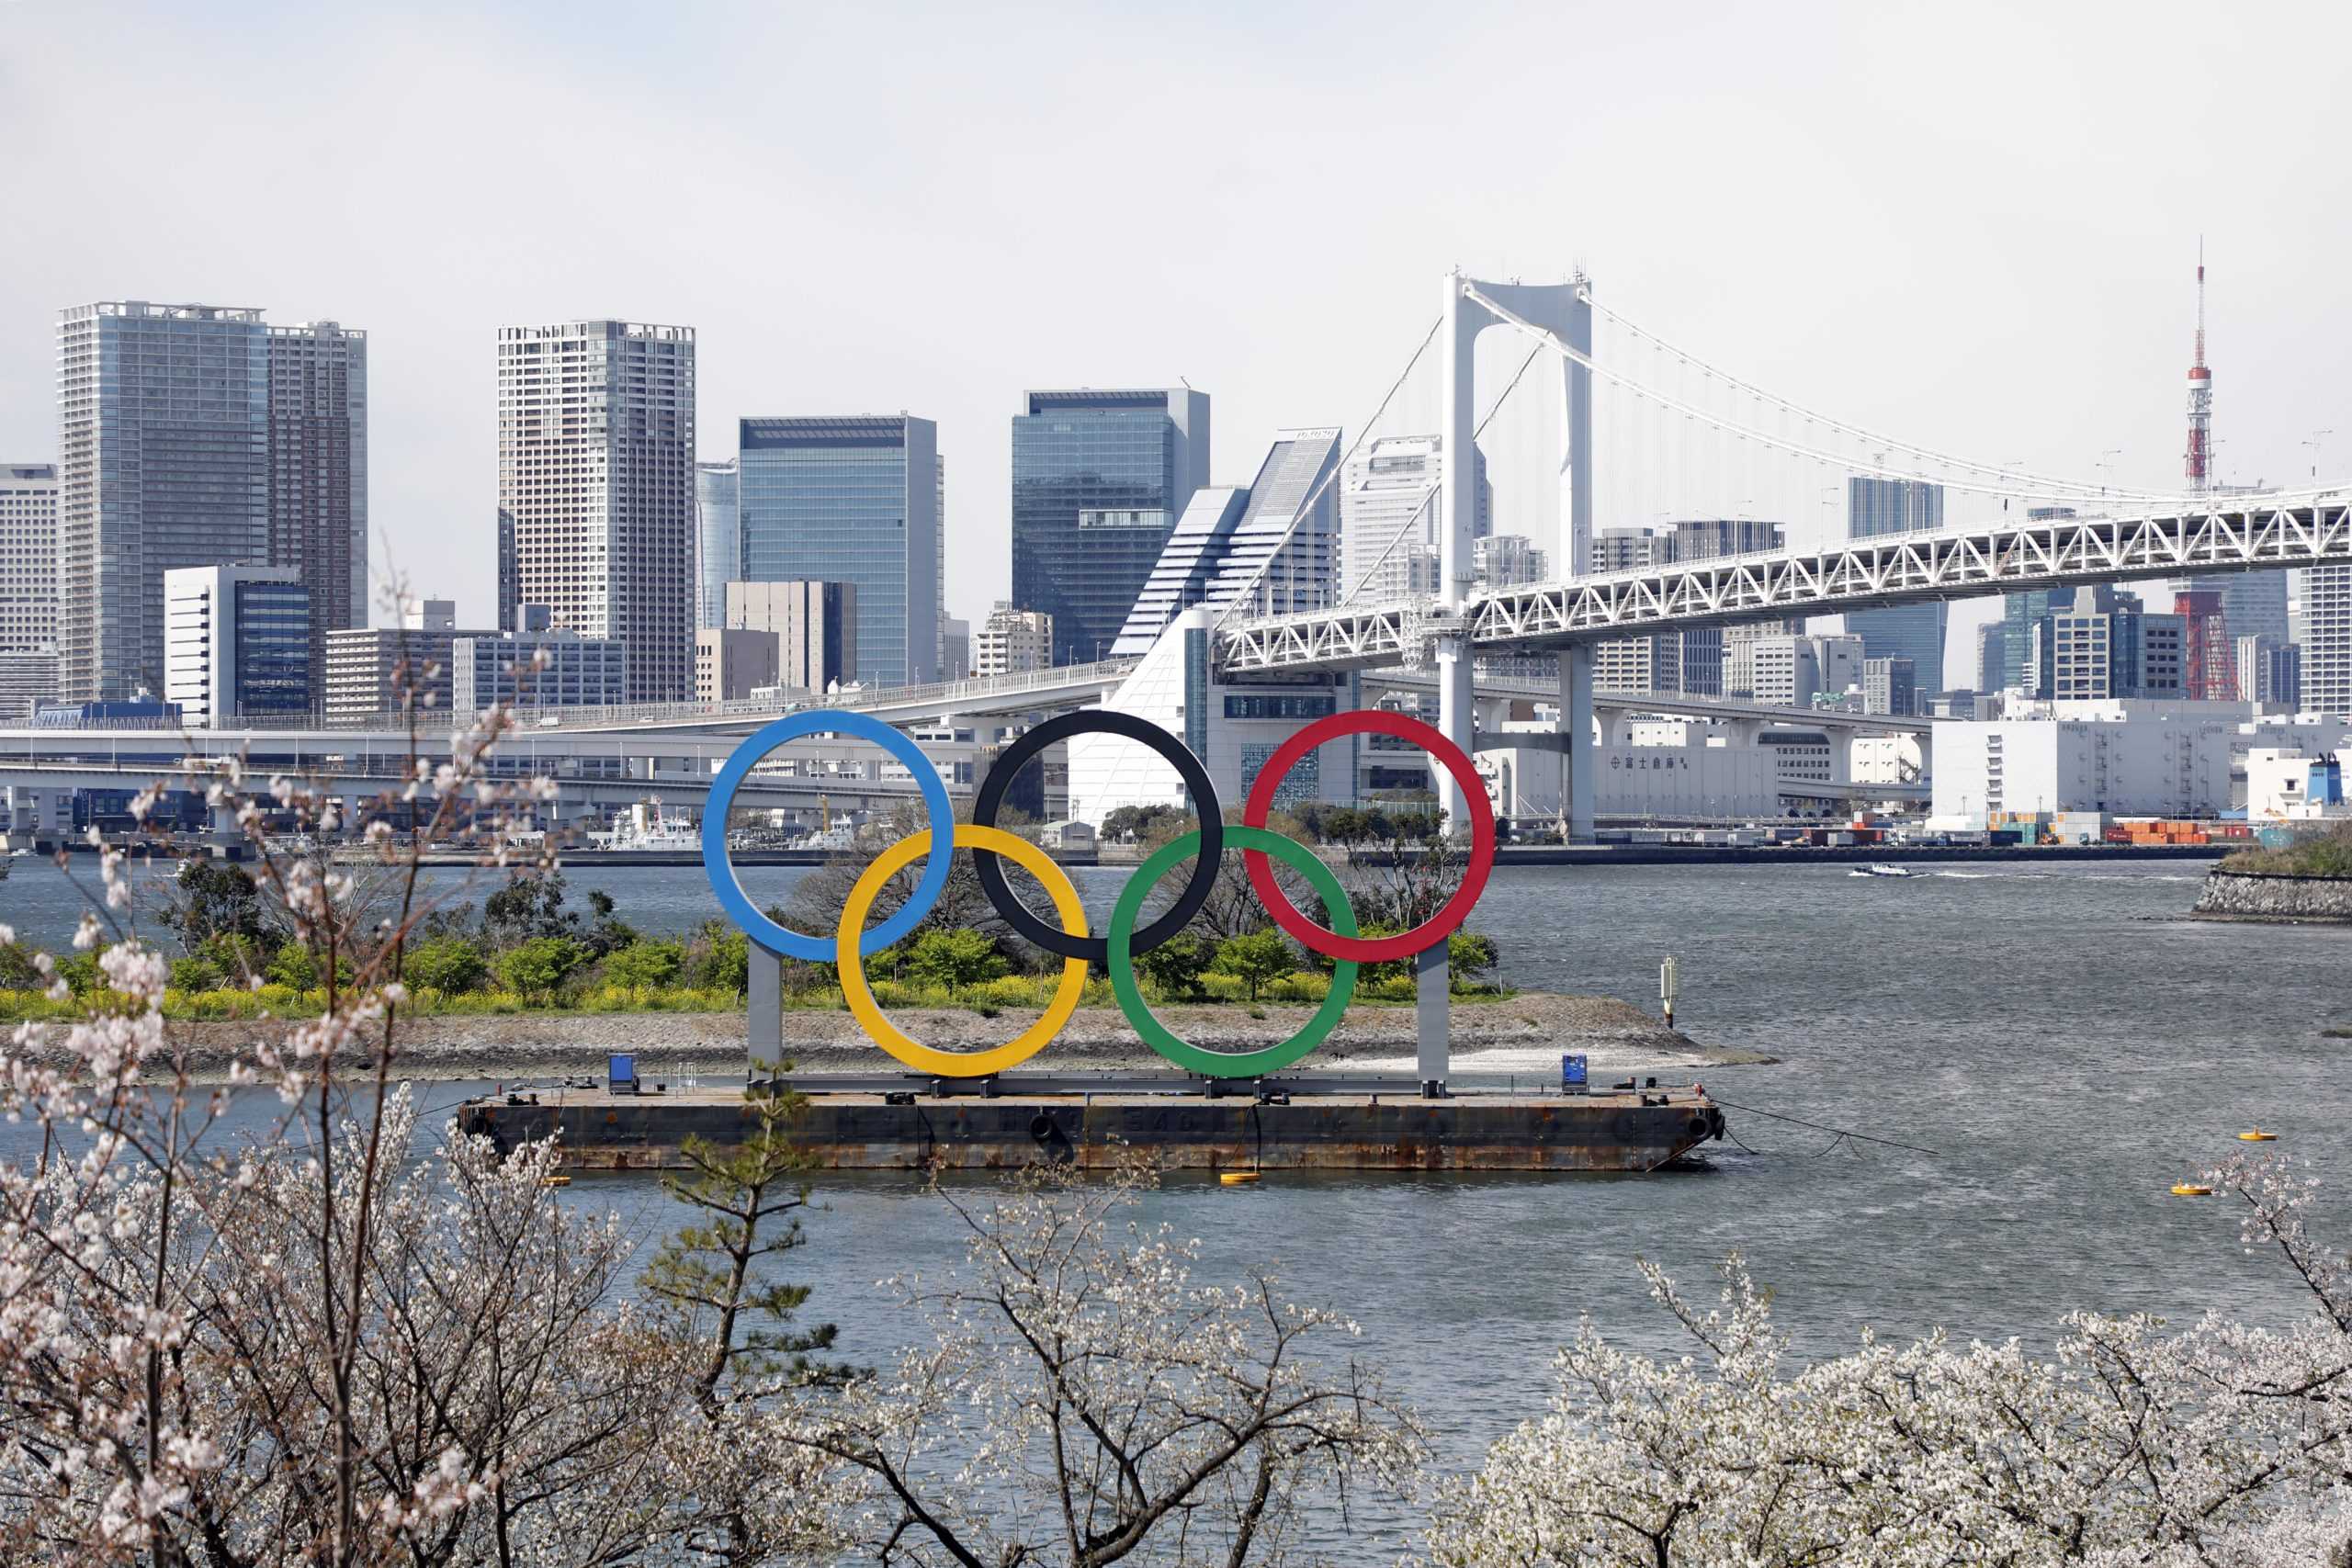 A view of the Olympic rings monument Tuesday at Rainbow Bridge, Odaiba, Tokyo. The IOC announced this week that the 2020 Tokyo Games have been postponed due to the coronavirus pandemic. [Yukihito Taguchi/USA TODAY Sports]